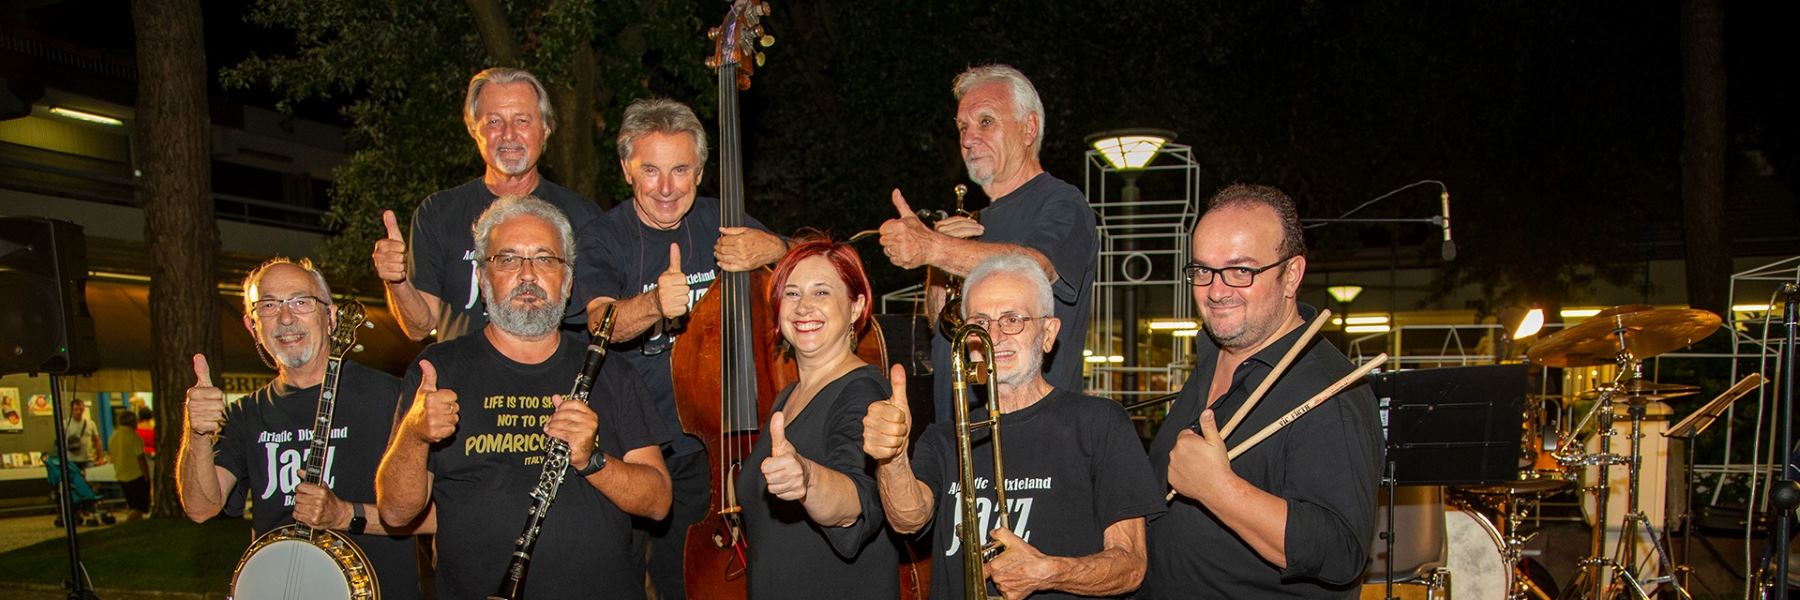 Concert by the Adriatic Dixieland Jazz Band in Pinarella 